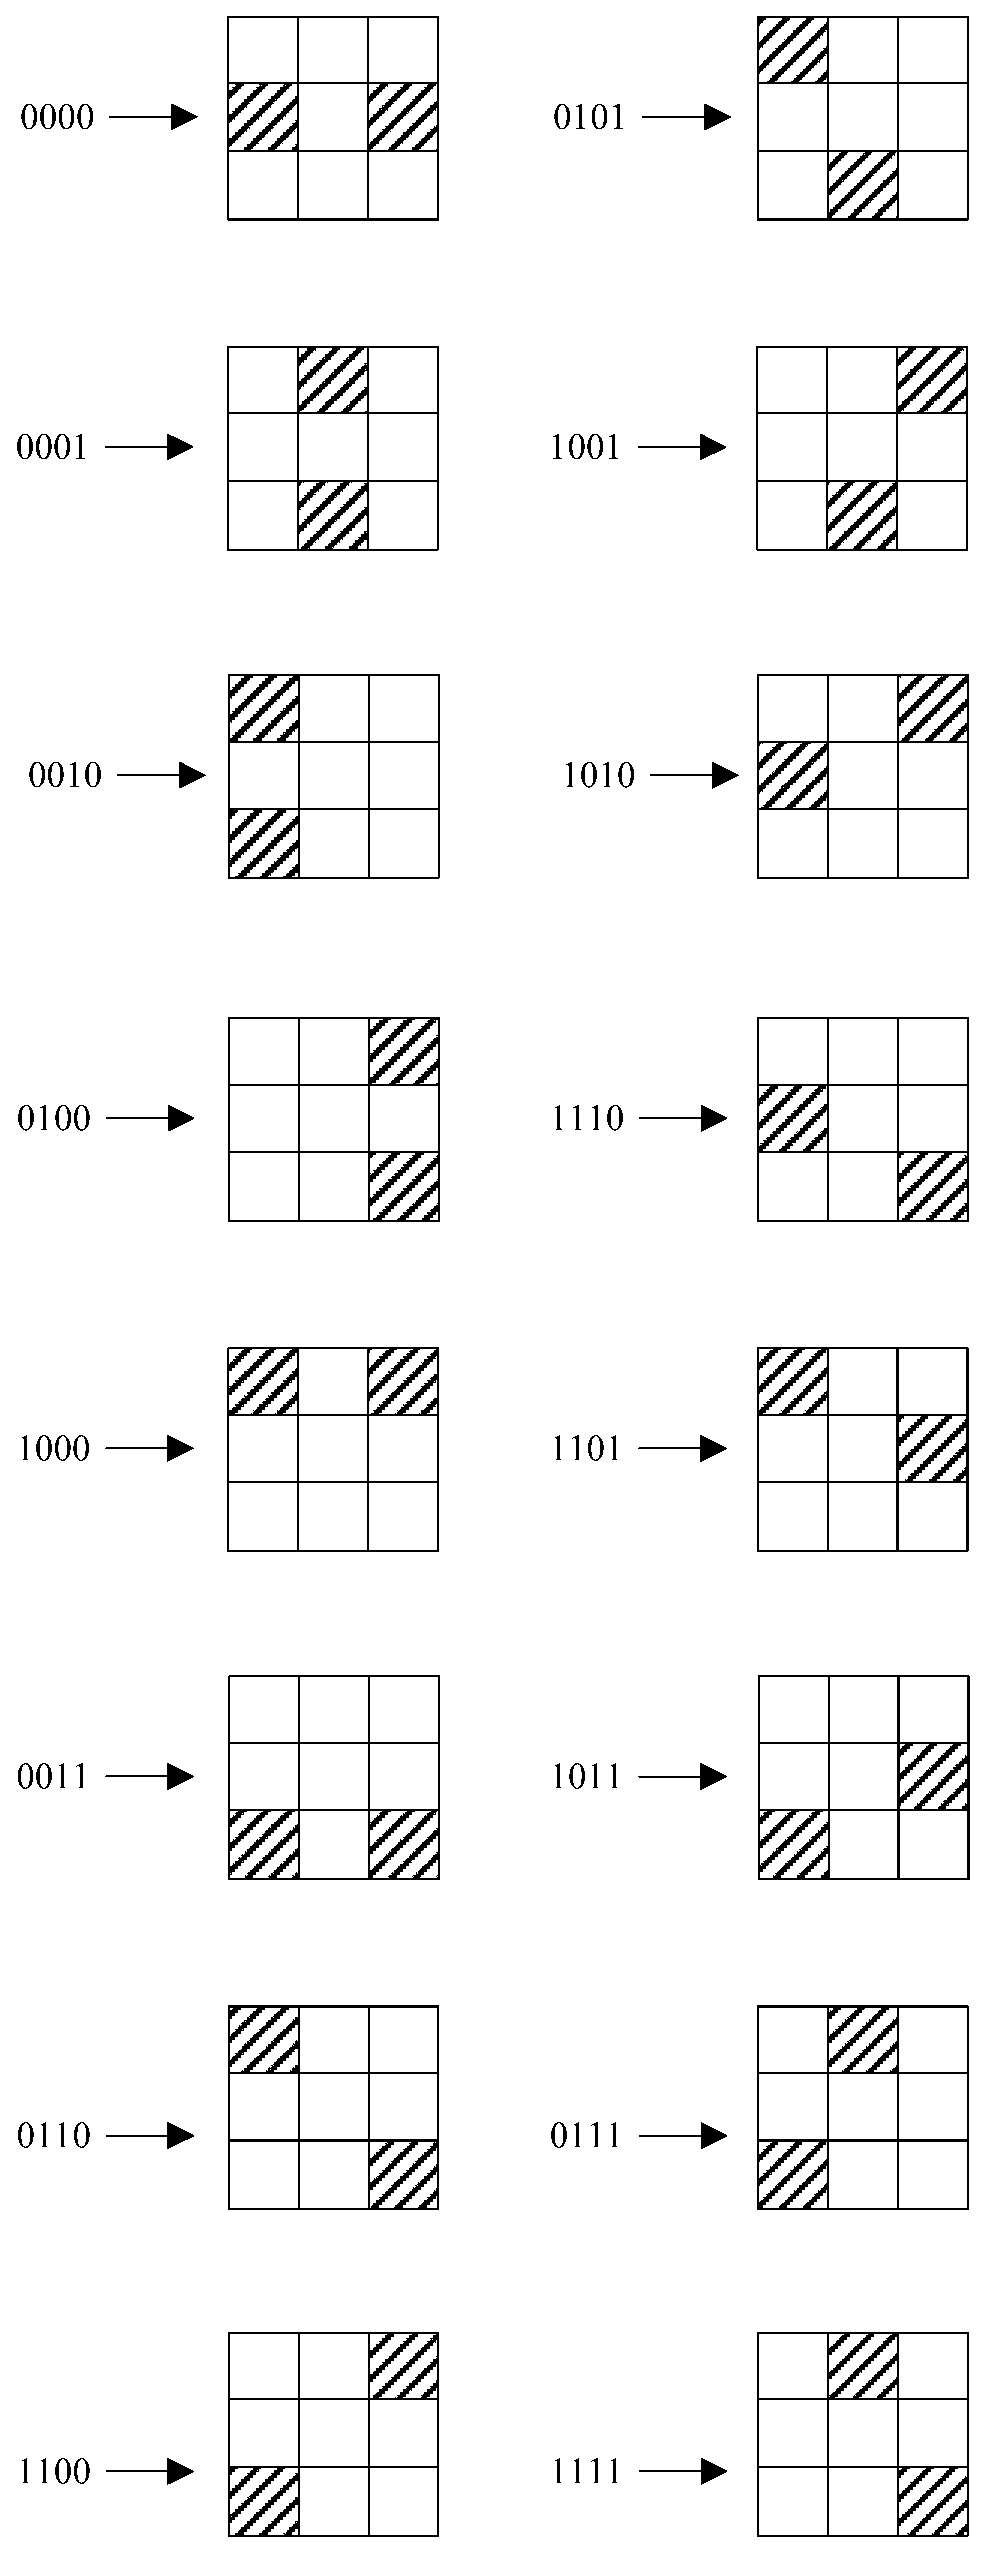 A recognition method for stacked two-dimensional codes with logo icons